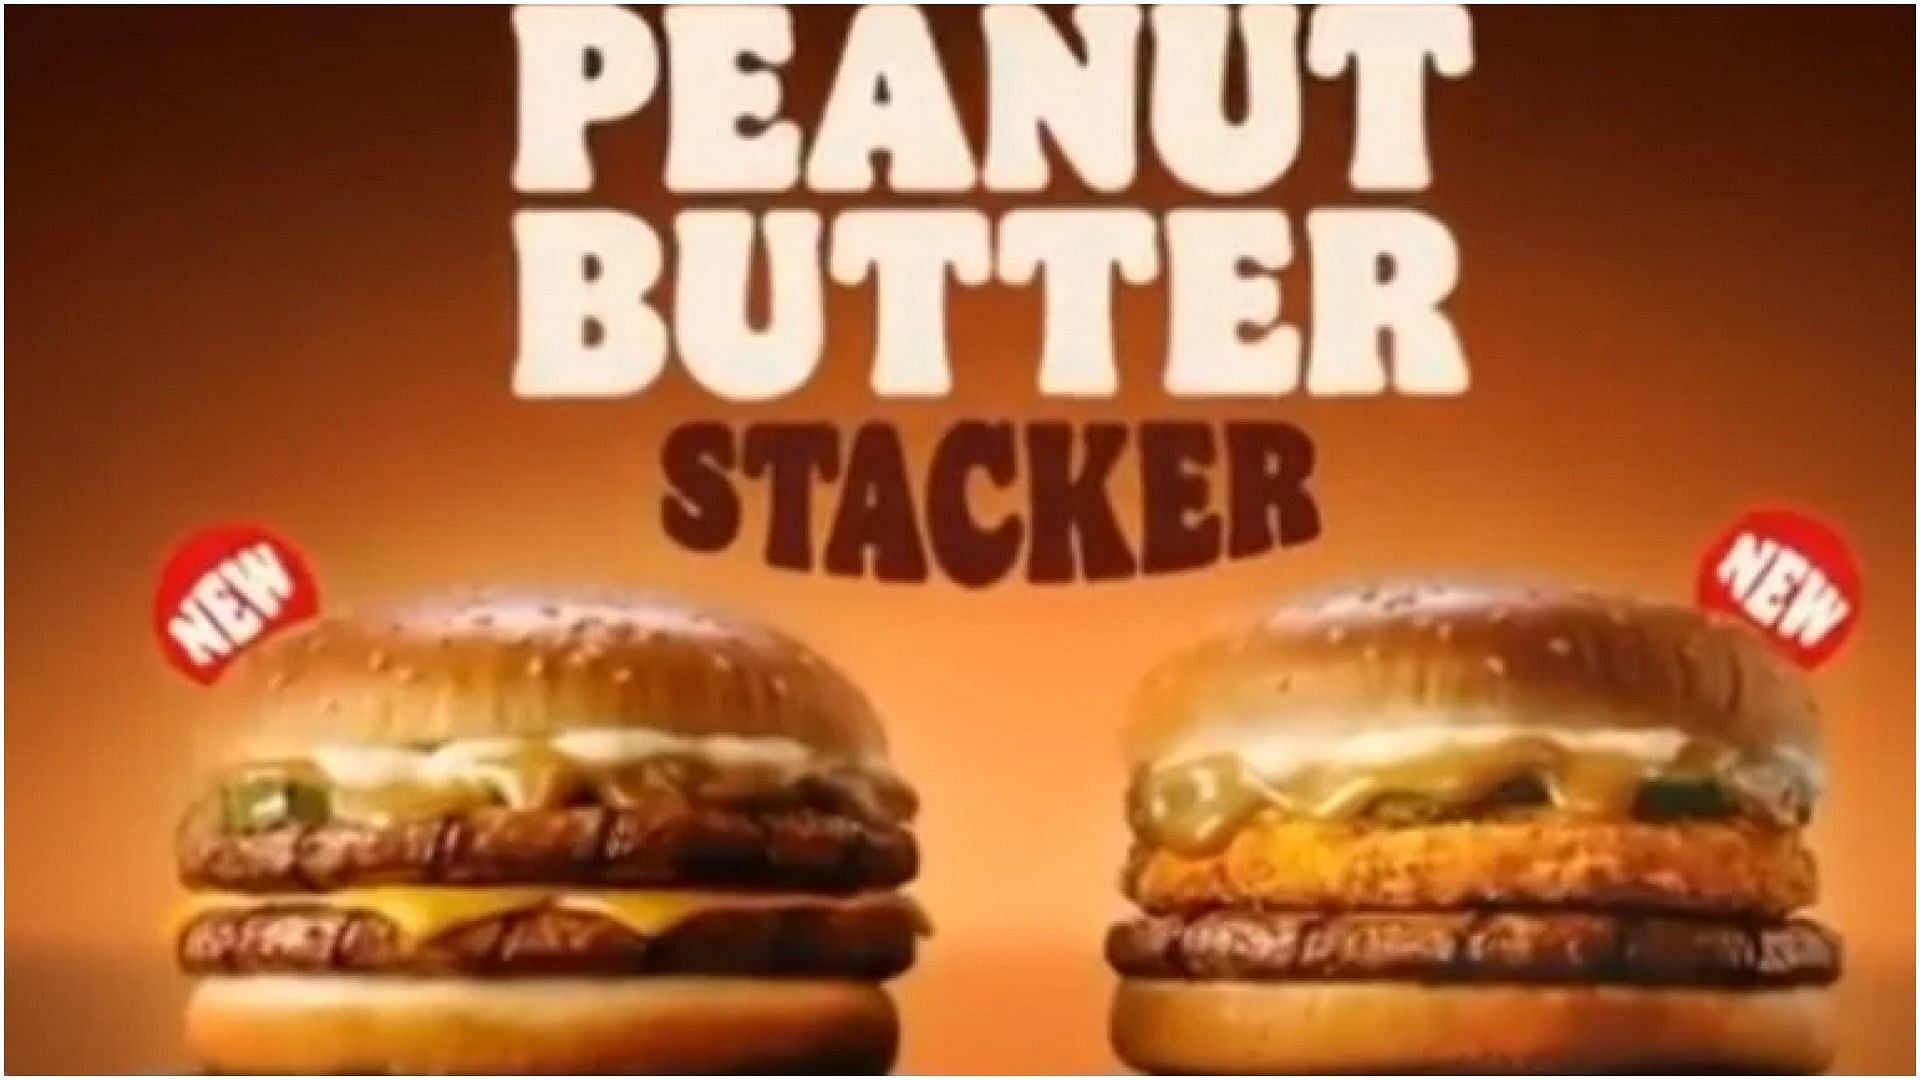 A Peanut Butter Stacker is now available in select Burger King locations in South Korea. (Image via burgerkingkorea/Instagram)